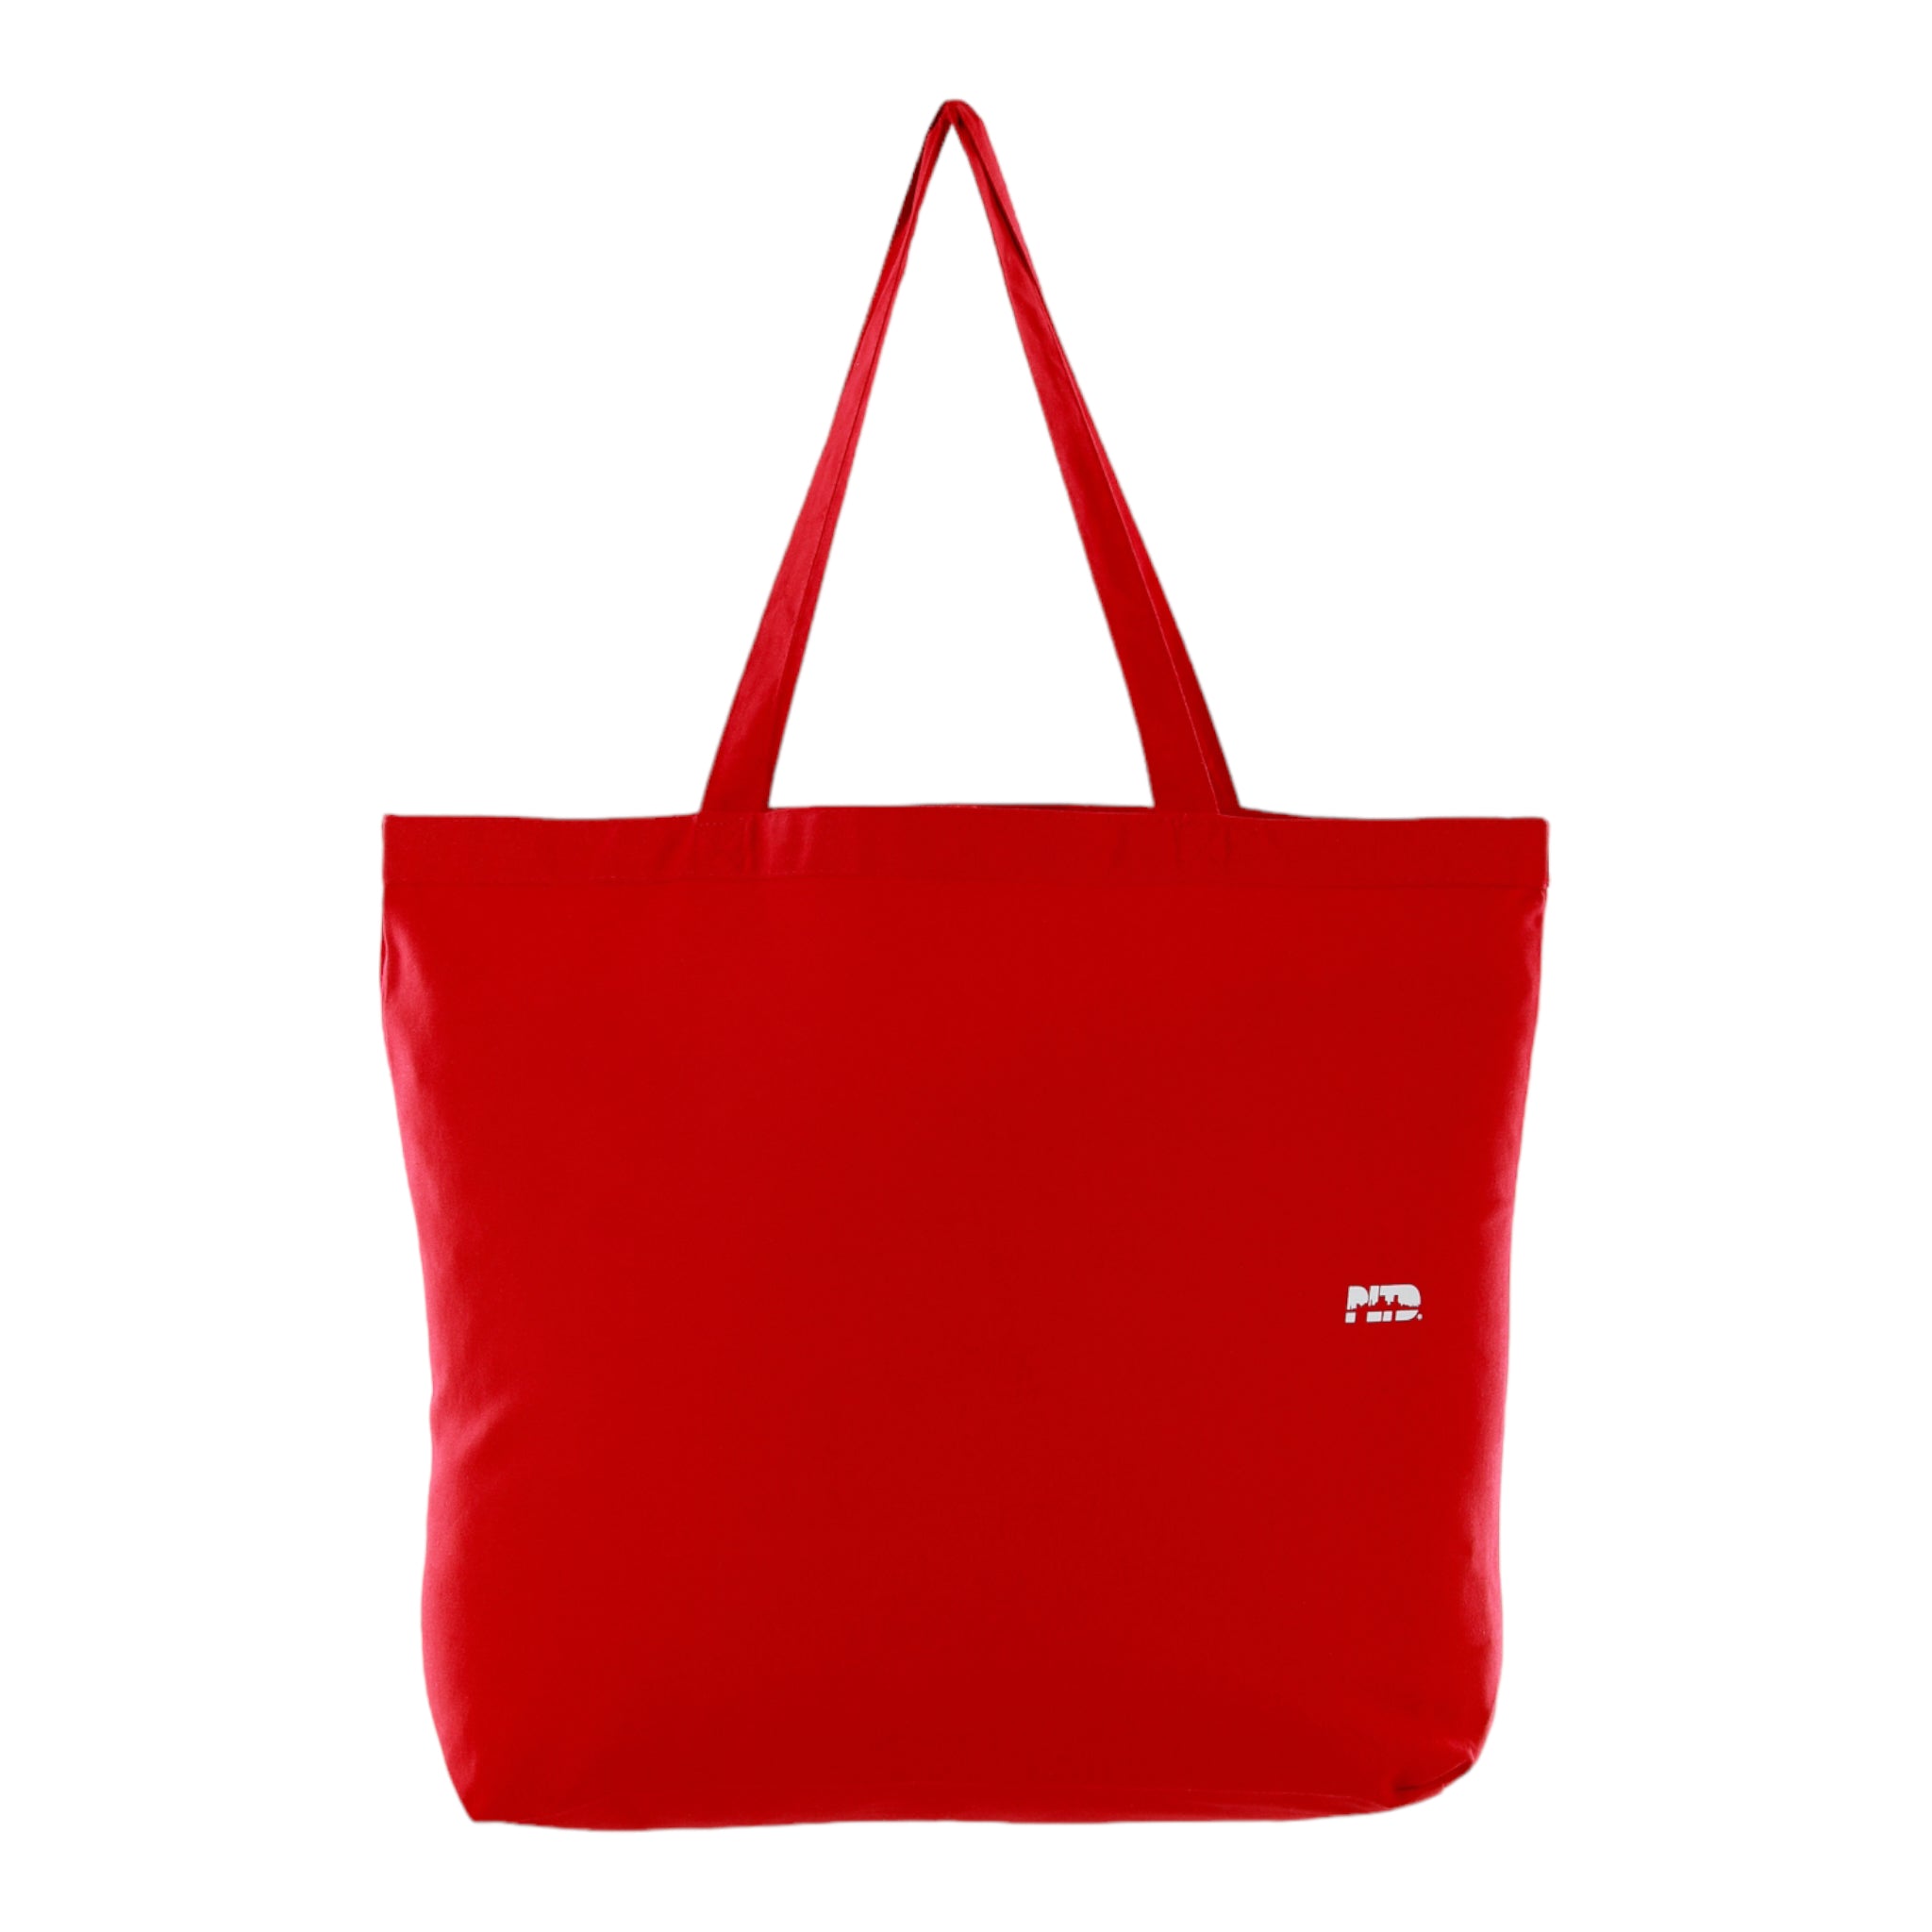 Stay Out of Uptown - Red Canvas Tote Bag